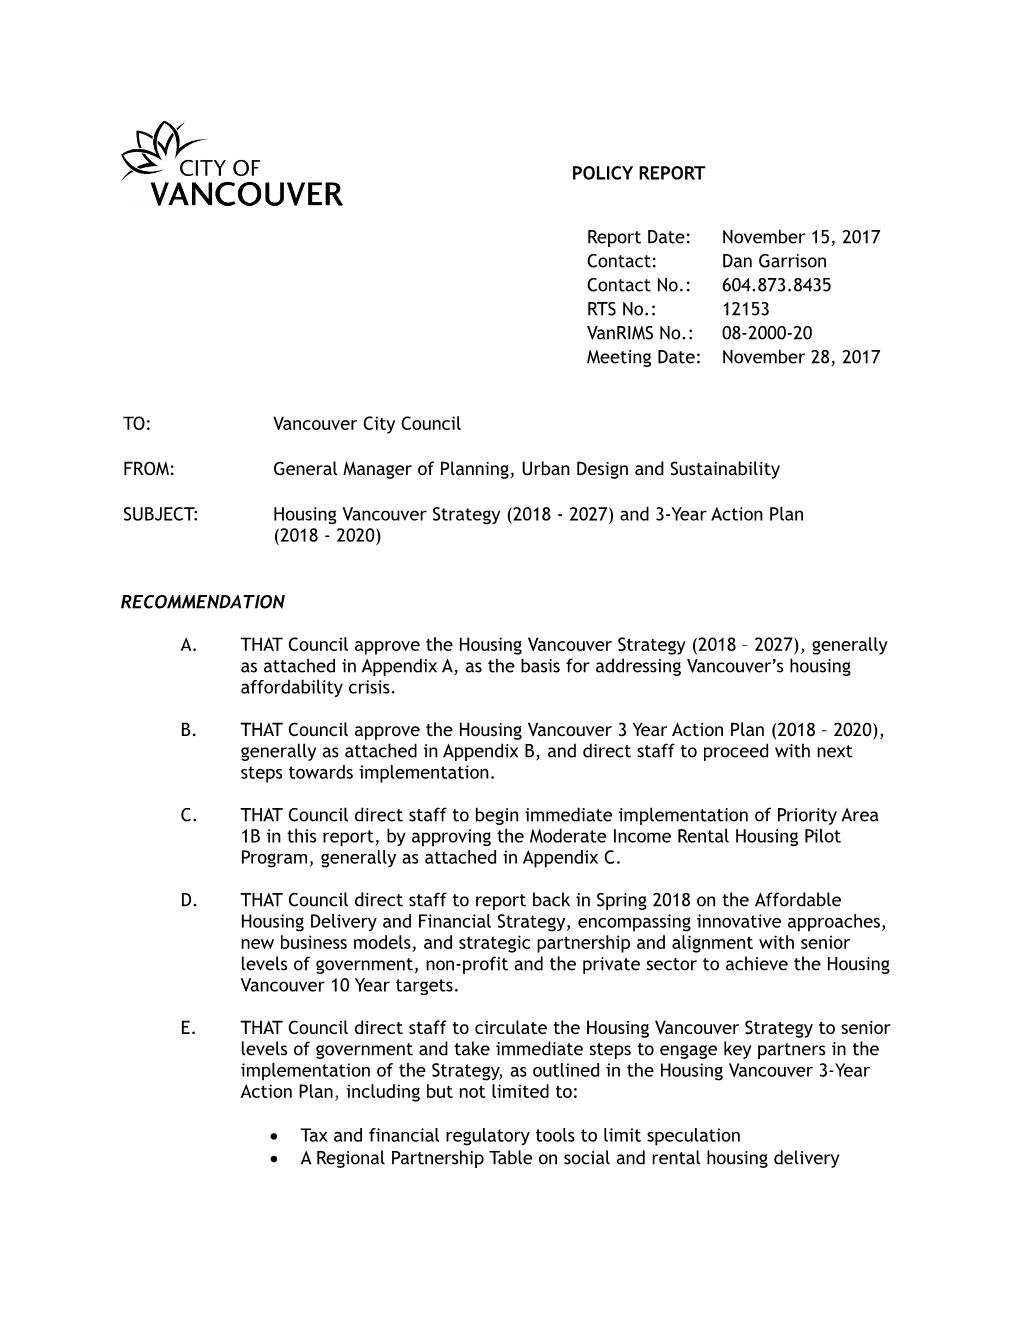 Housing Vancouver Strategy & 3 Year Action Plan